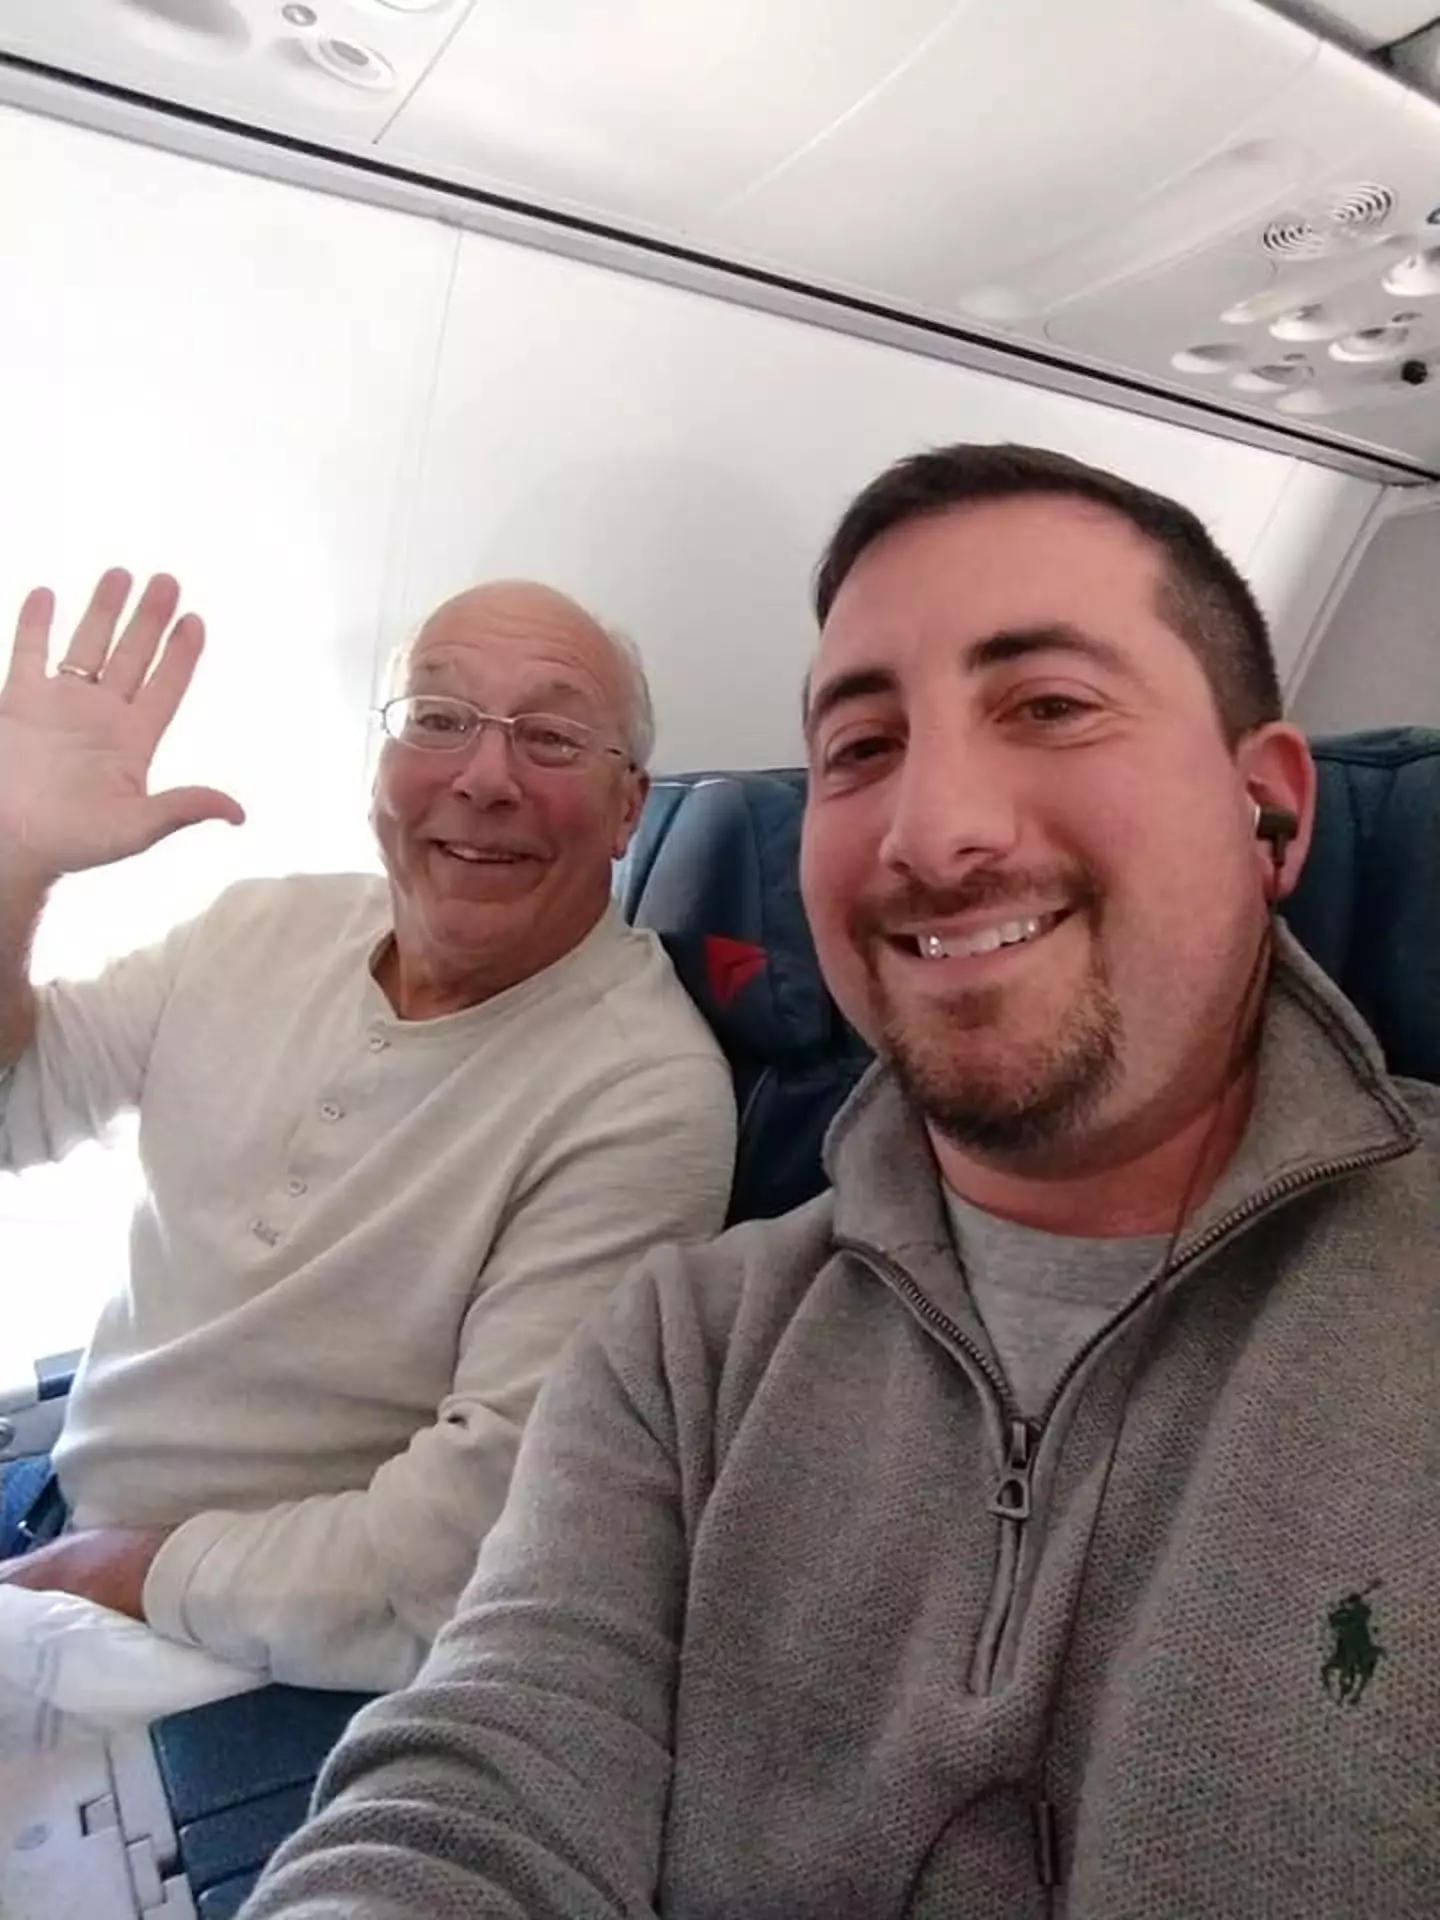 The dad bought six different plane tickets to be with his daughter over Christmas.